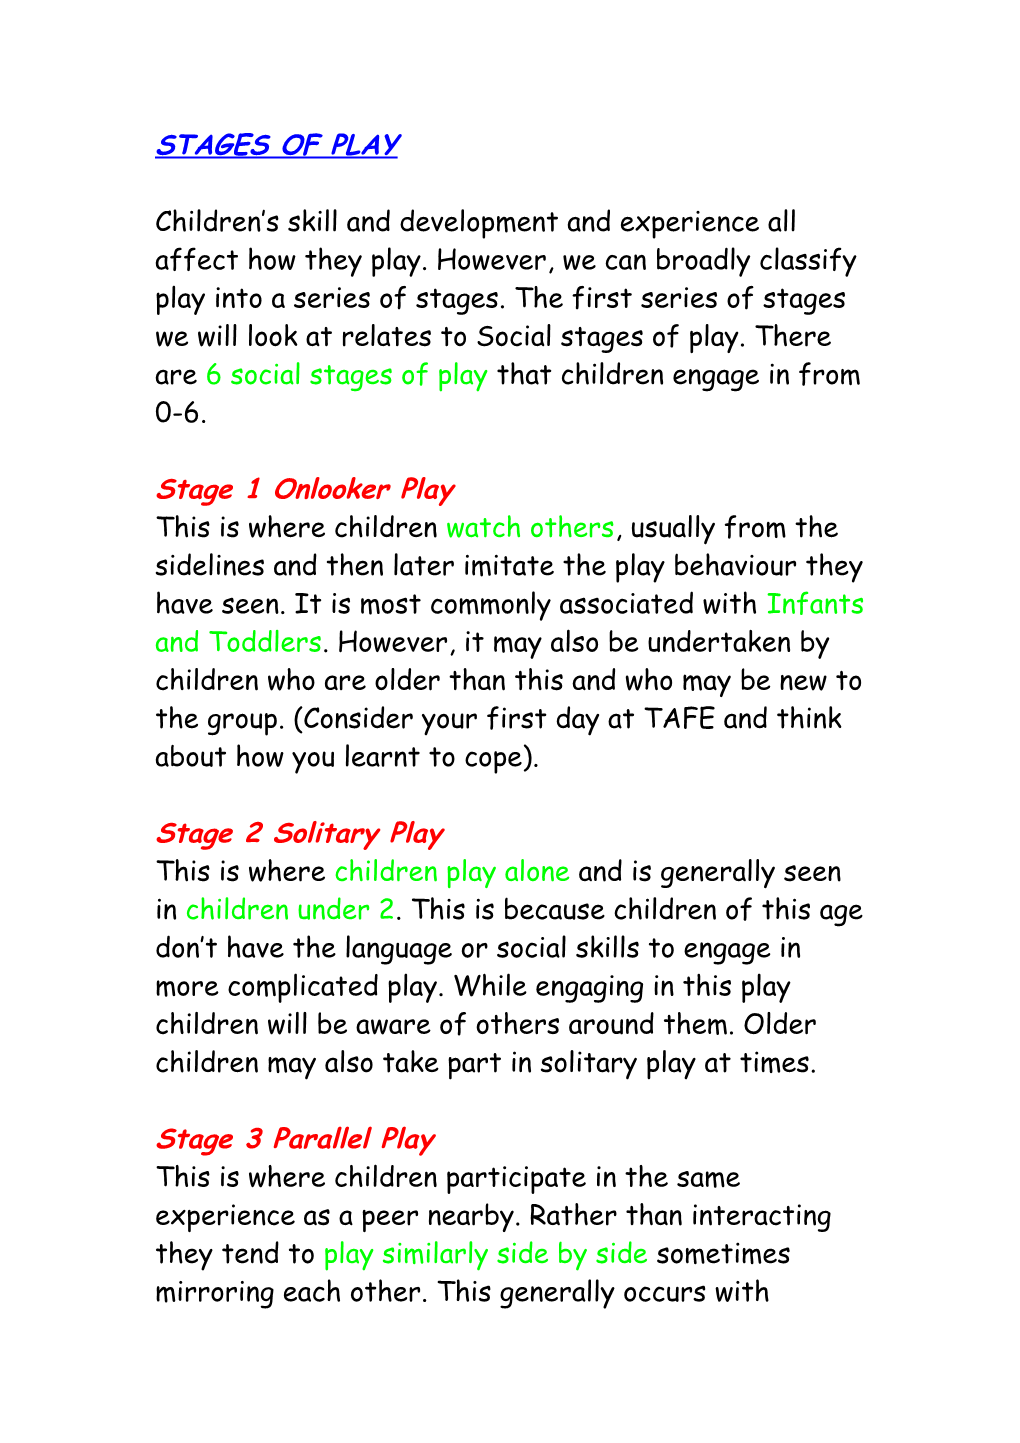 Stages of Play